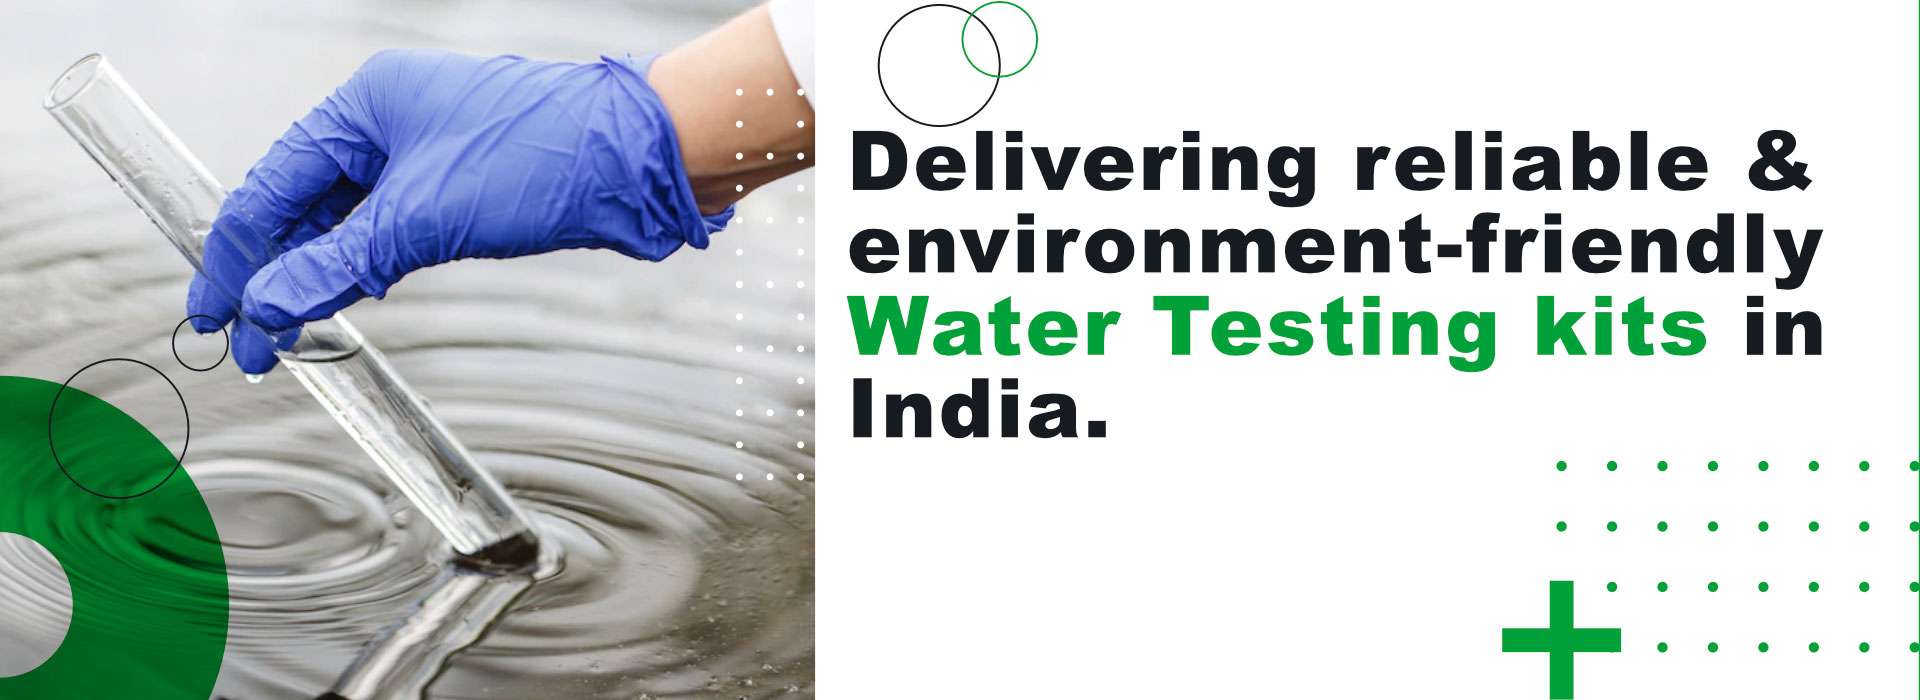  Delivering reliable & environment-friendly water Testing kits in India Manufacturers in Agra